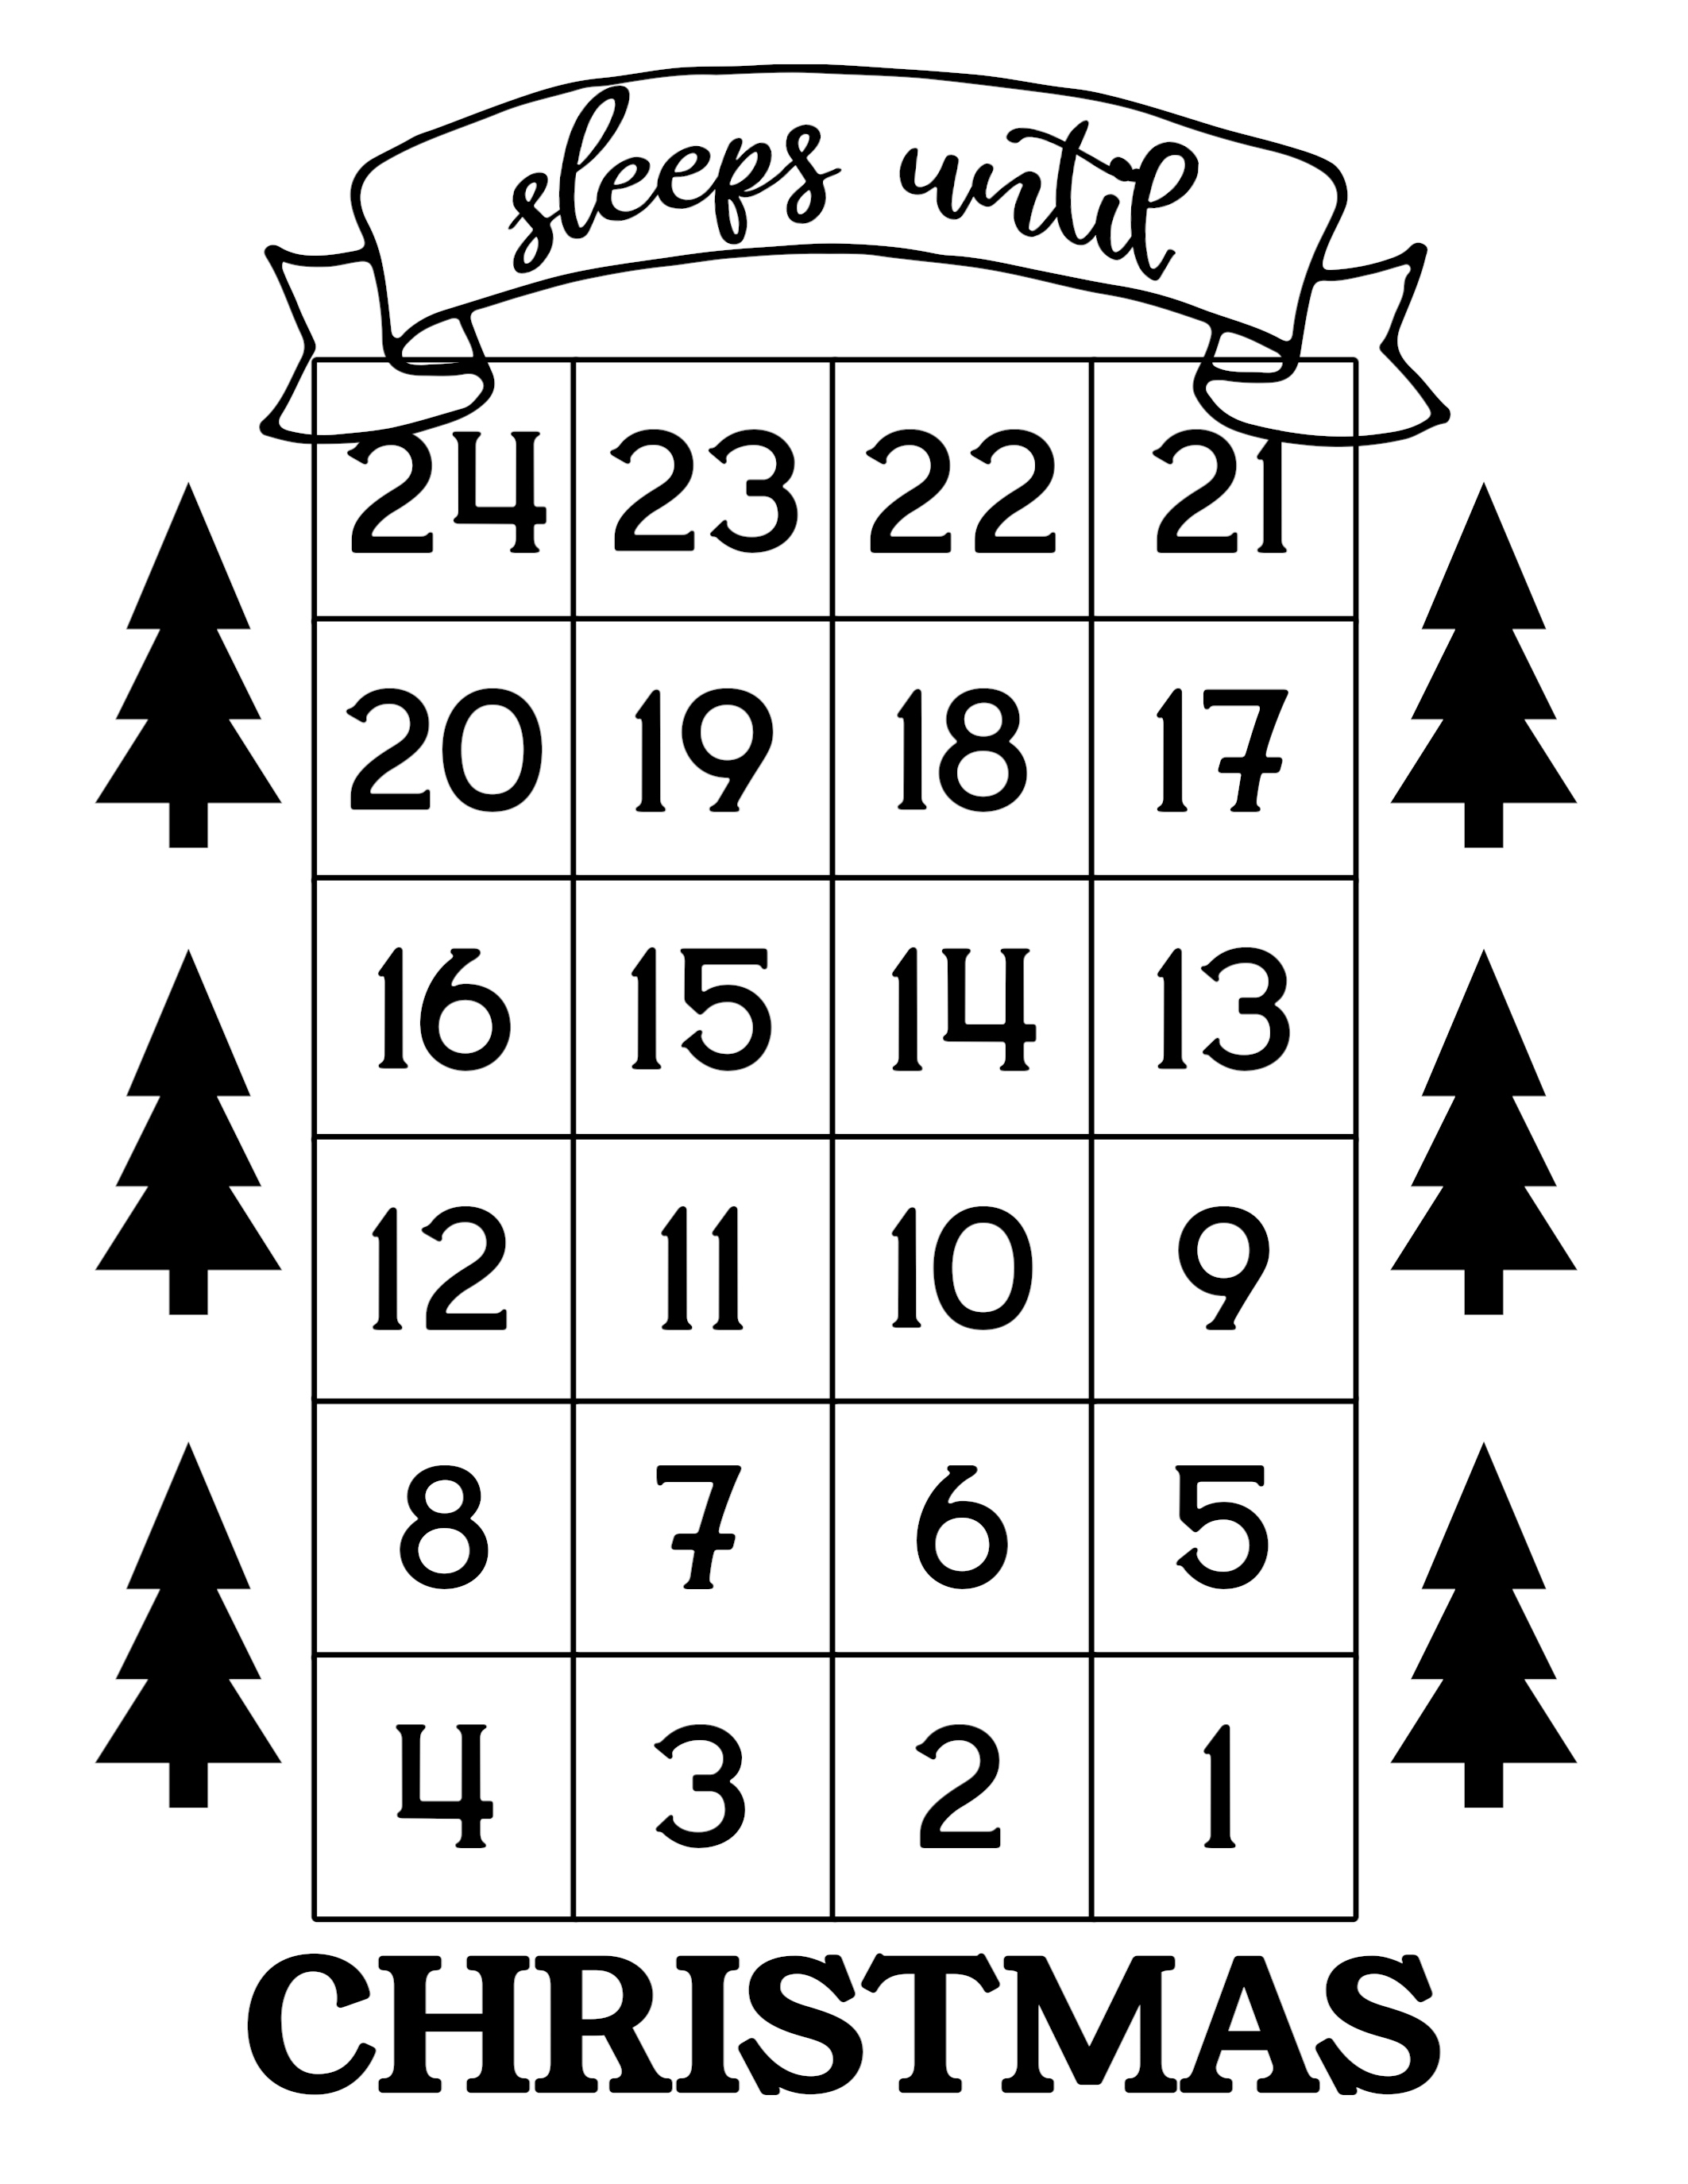 How Many Days Until Christmas Free Printable - Paper Trail Remarkable Countdown Christmas Calendar Print Out